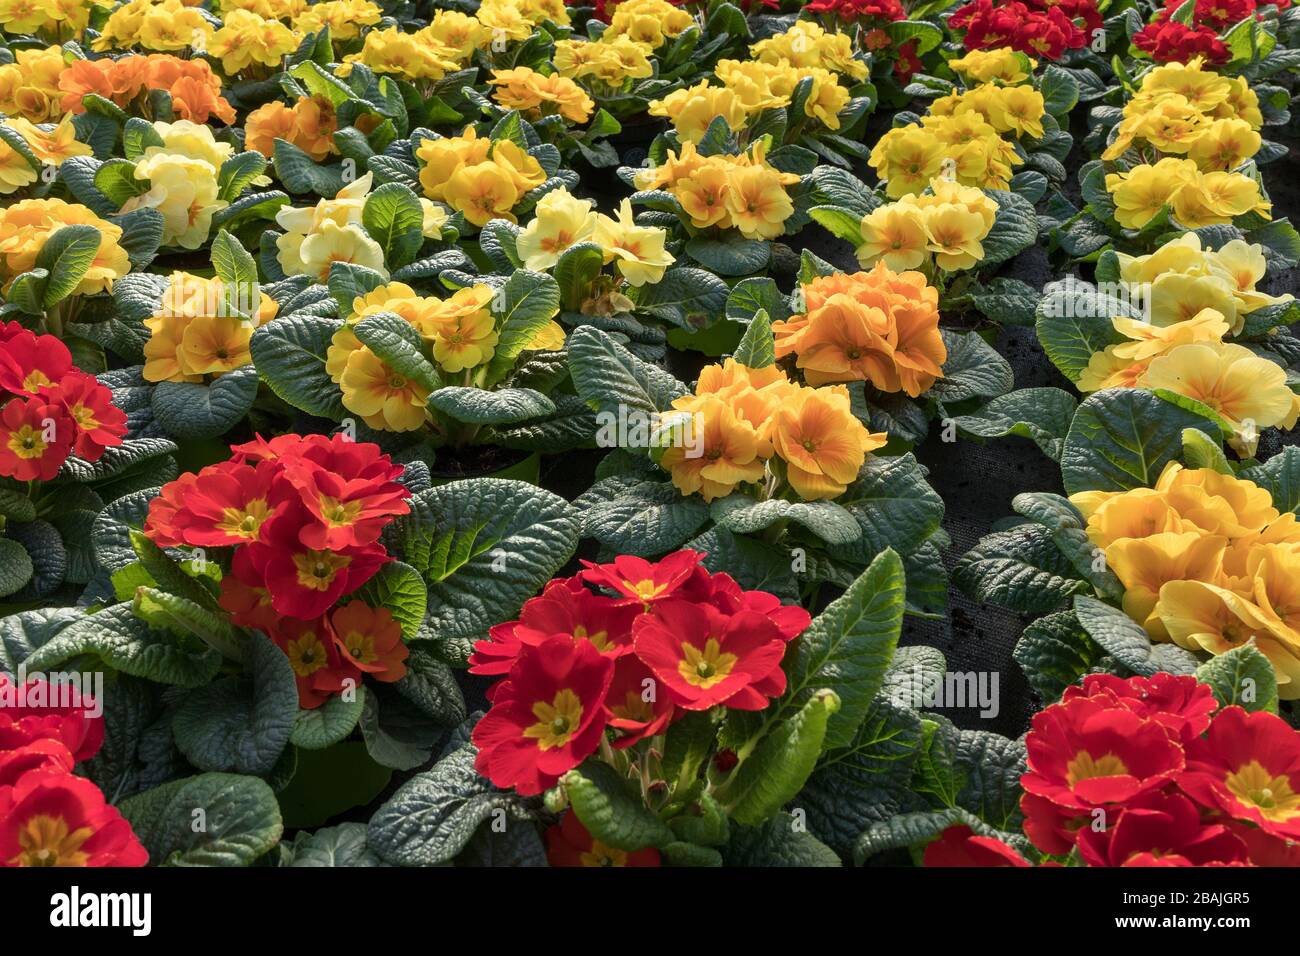 Variety of colorful red and yellow cultivated primula plants full frame Stock Photo